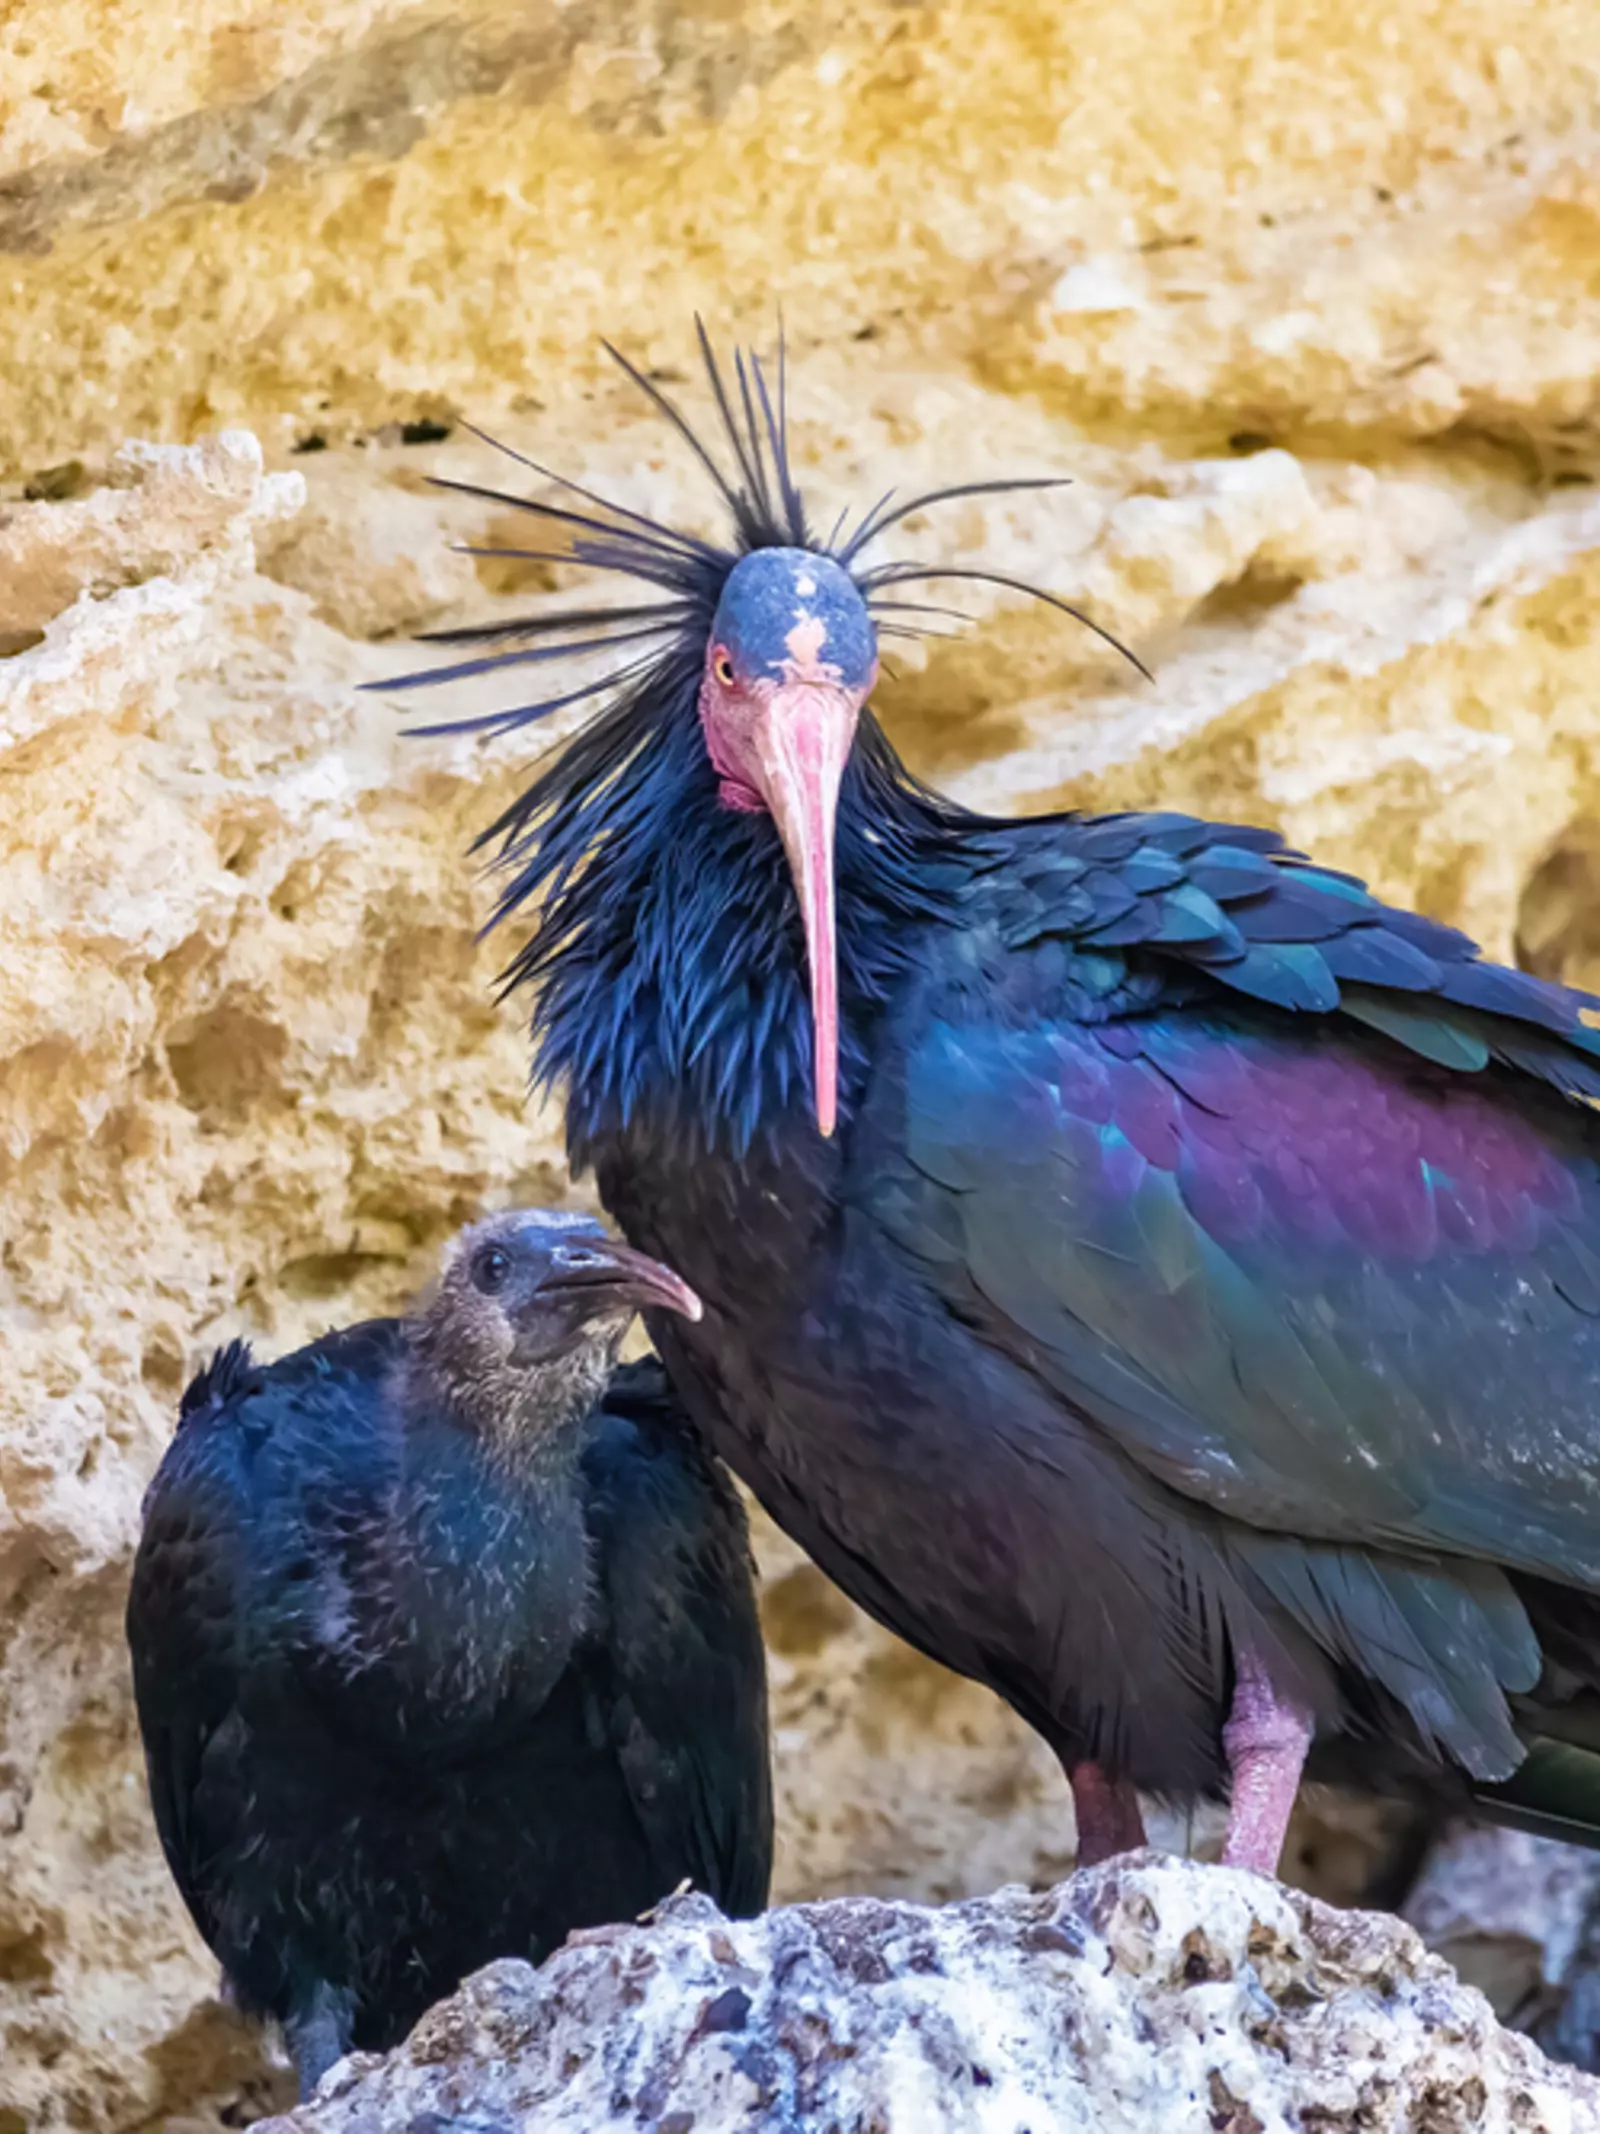 Waldrapp ibis (Nothern bald ibis) with a chick in Spain beside rocks.